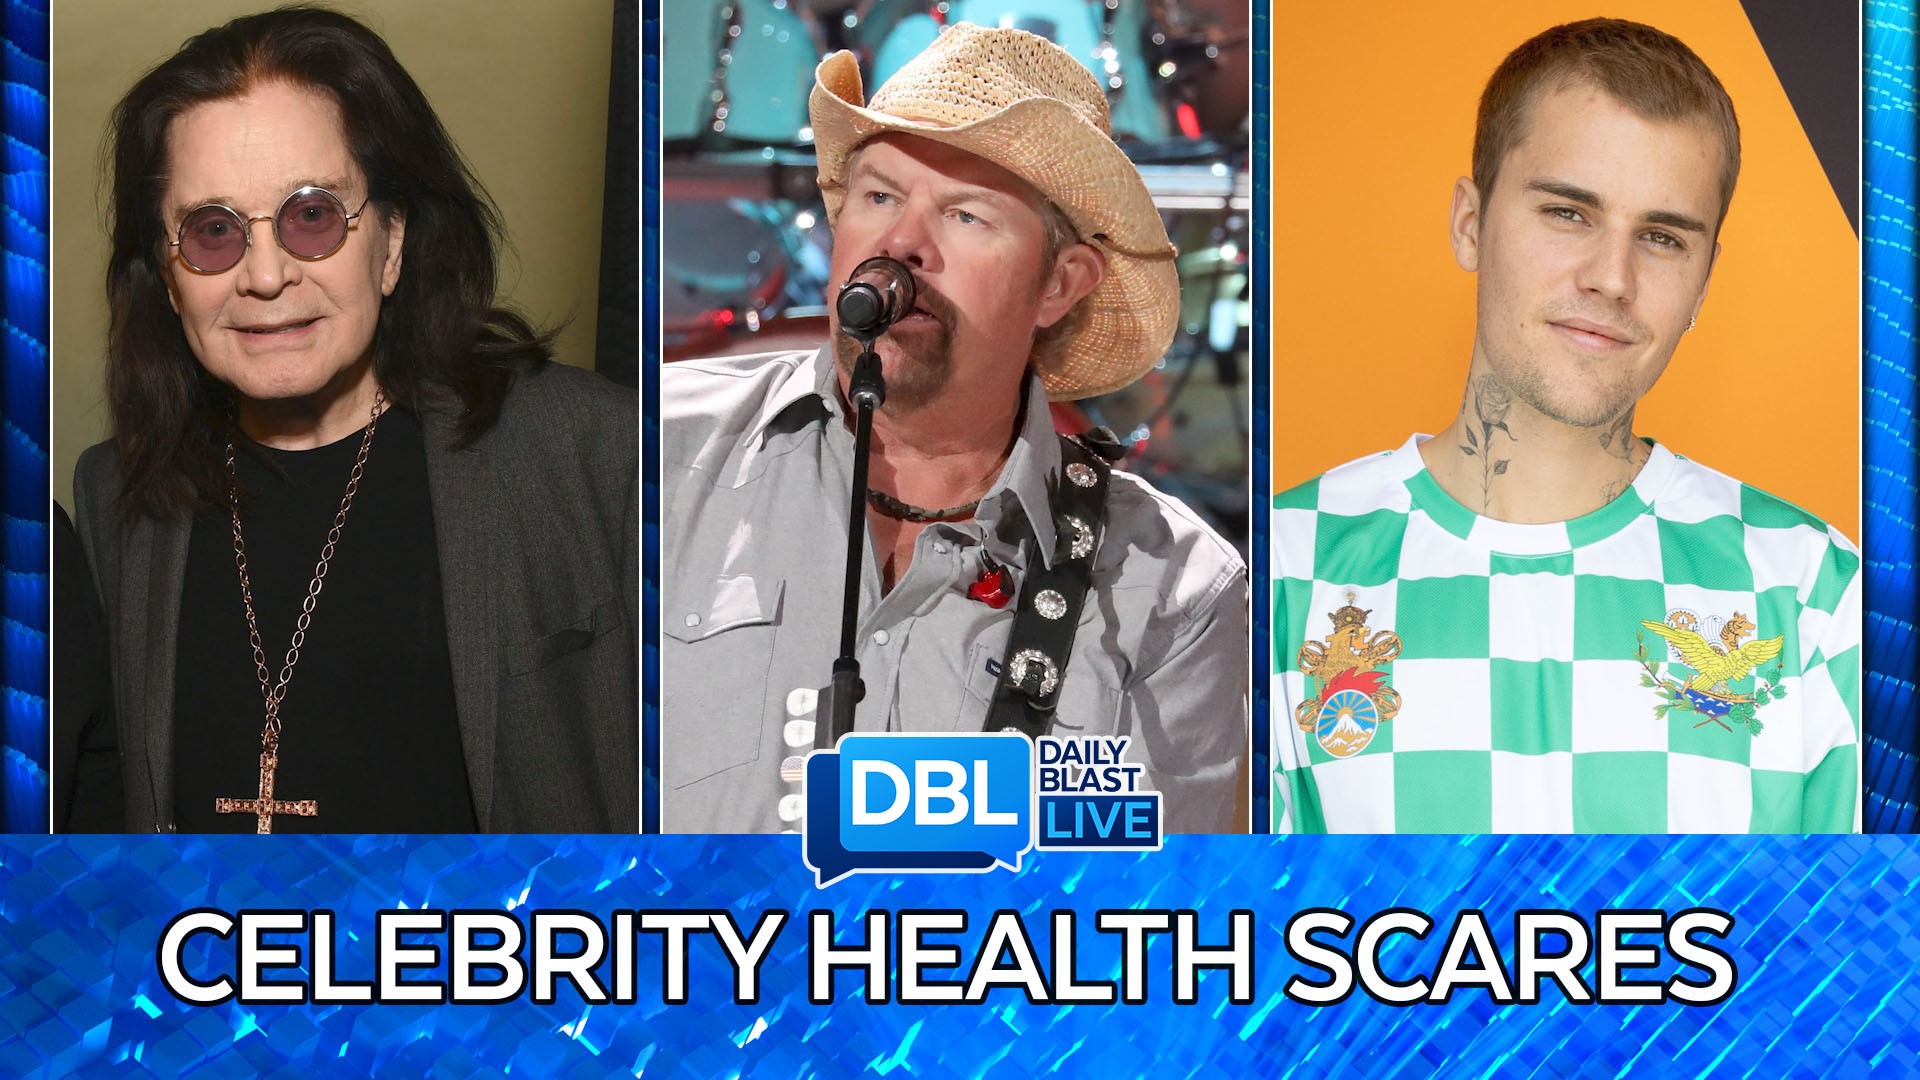 Some celebrities have recently been more open about their health struggles. Is it good for well-known celebs to share these personal details?